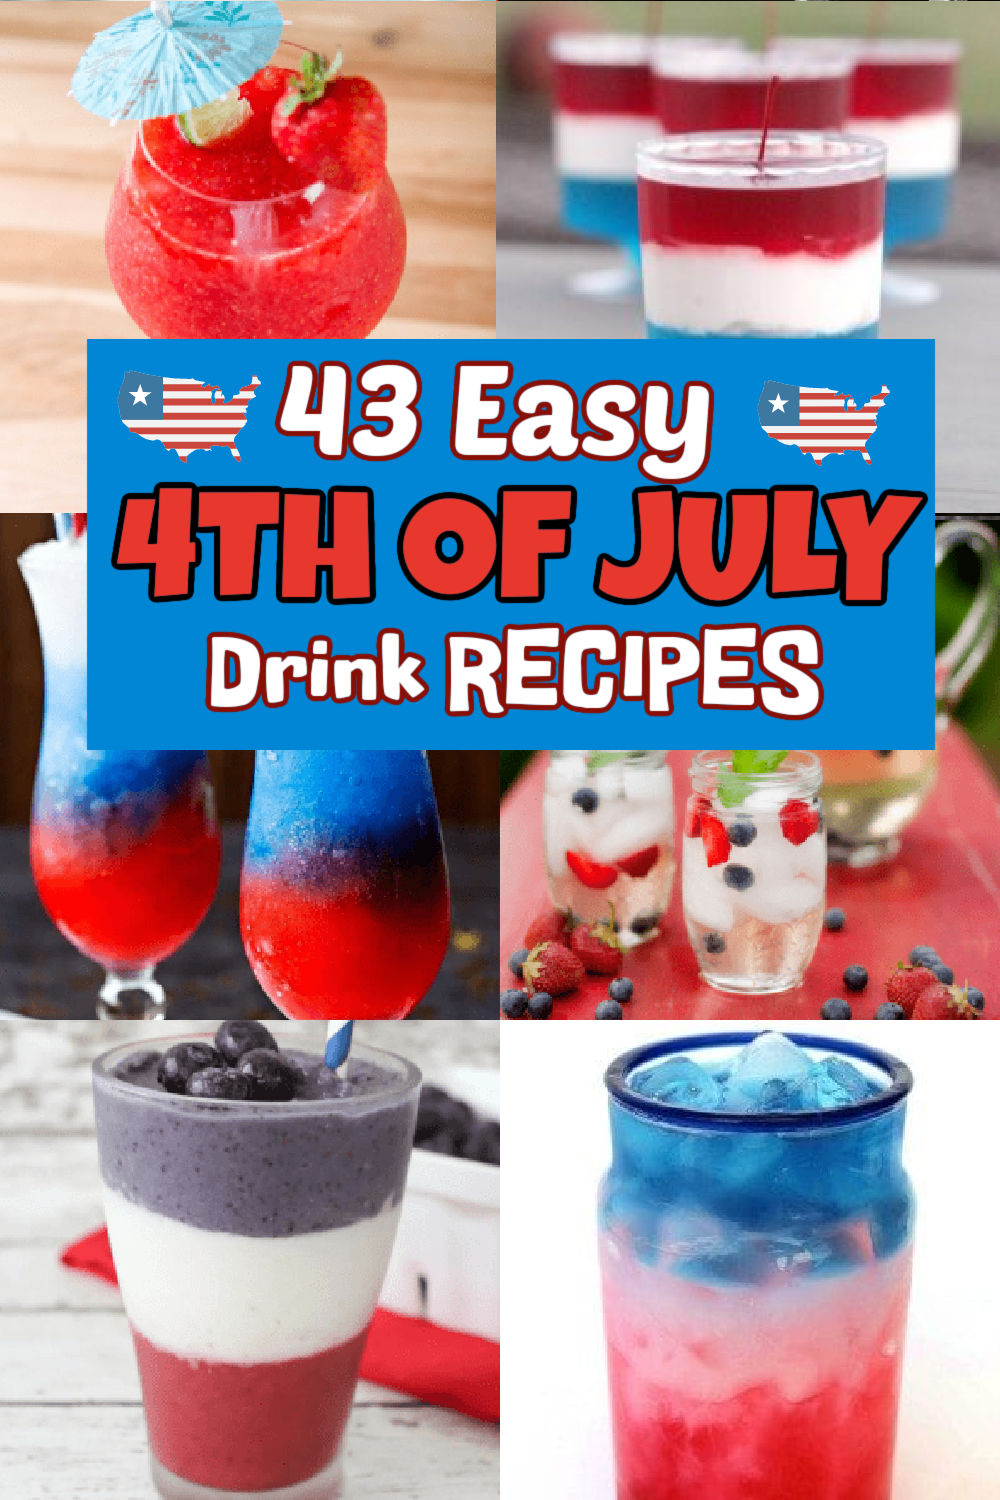 Get ready to raise a glass to Independence Day with these 43 easy 4th of July drinks. Whether you're hosting a backyard barbecue or lounging by the pool, these red. white and blue refreshing beverages will be a hit. Each drink is patriotic and delicious. #eatingonadime #4thofJulydrinks #fourthofJulydrinks